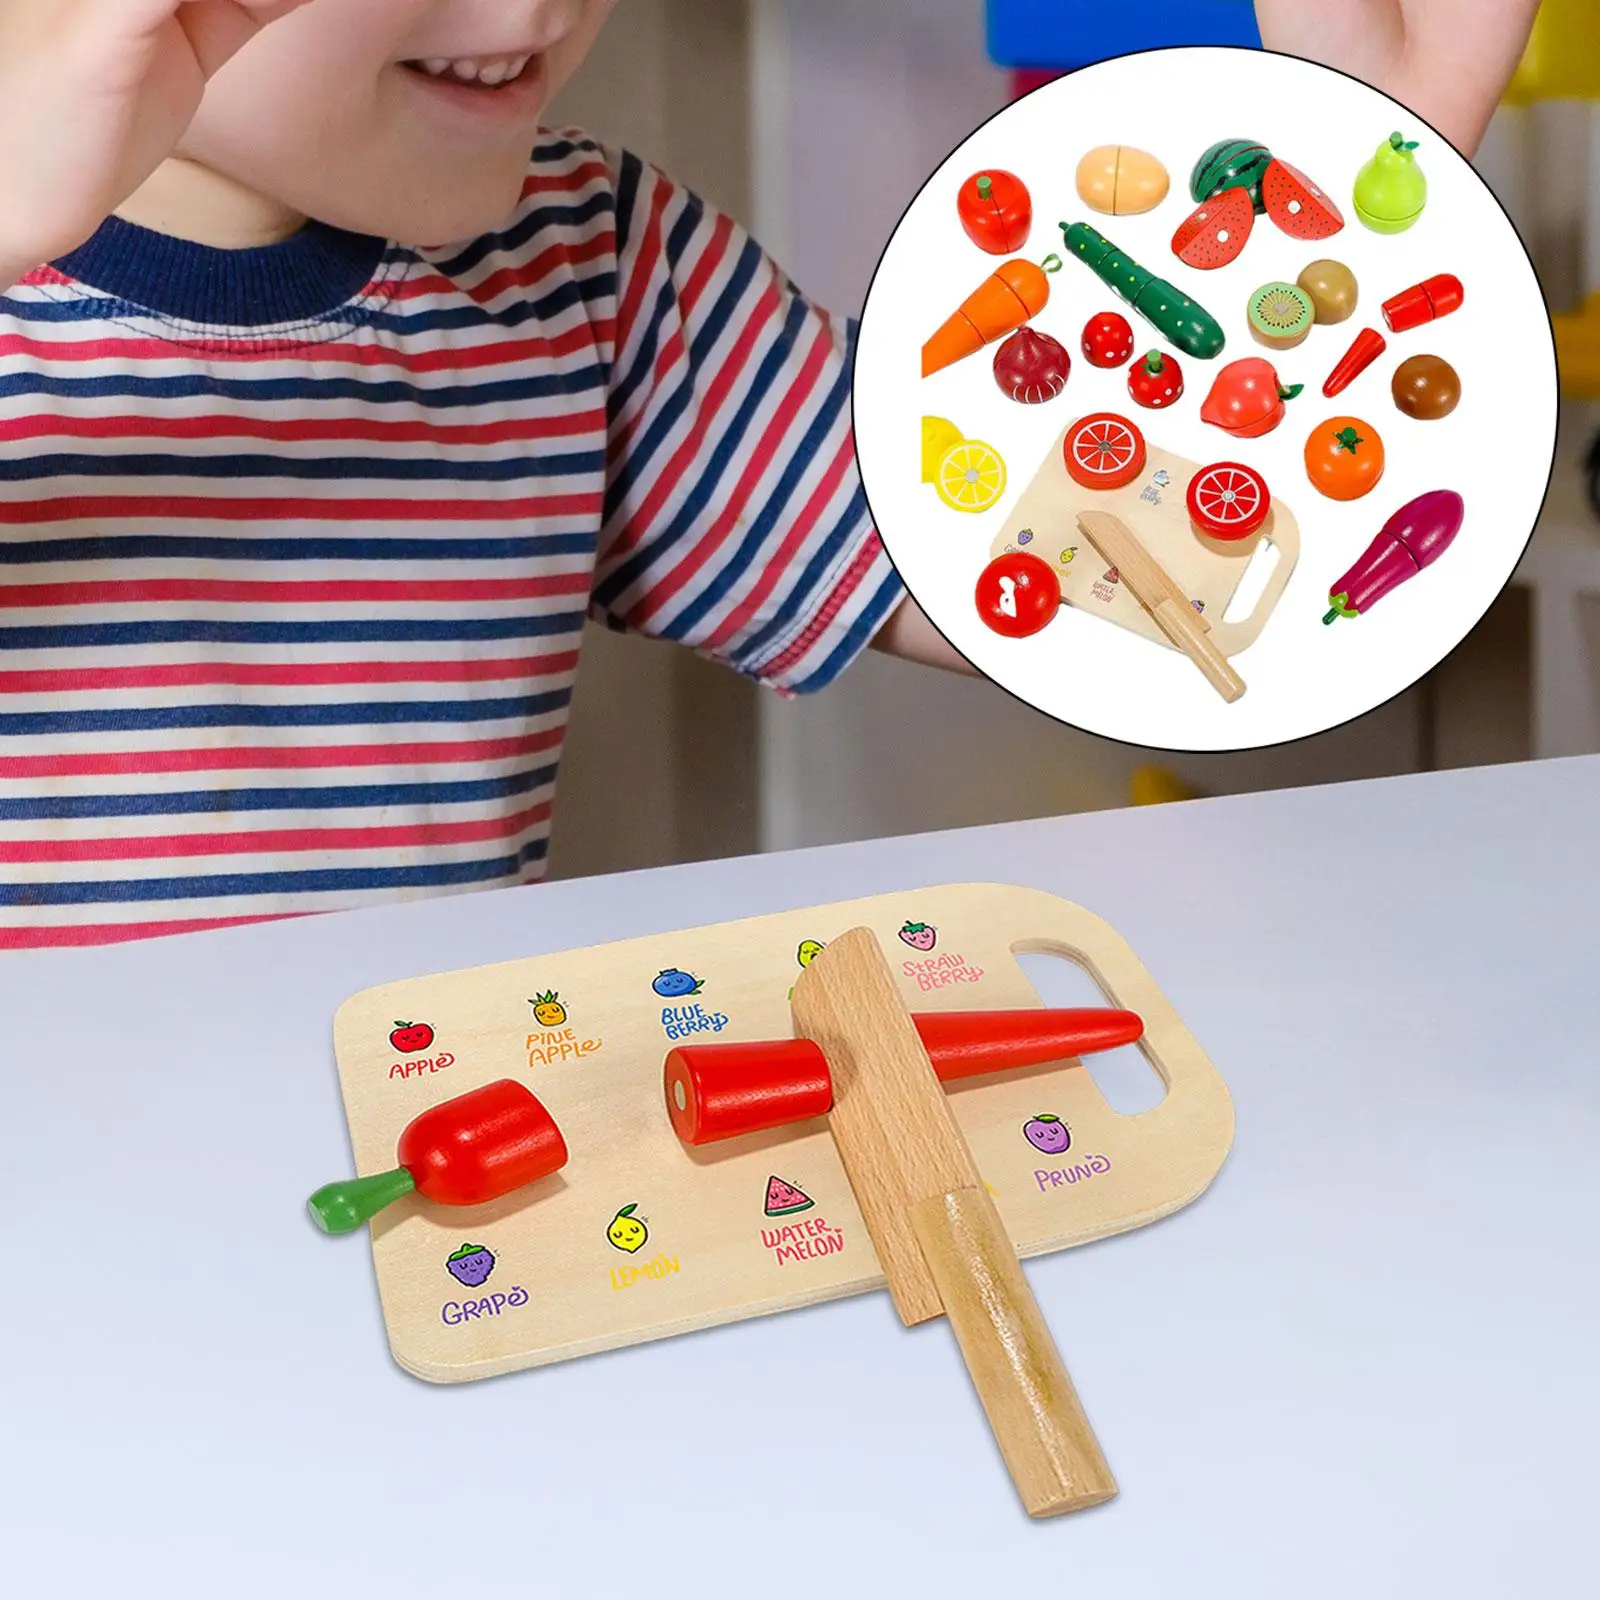 Toddlers Wooden Cutting Fruit and Vegetable Toy Early Development Colorful for 3, 4, 5, 6 Year Old Easily Store Gift Educational